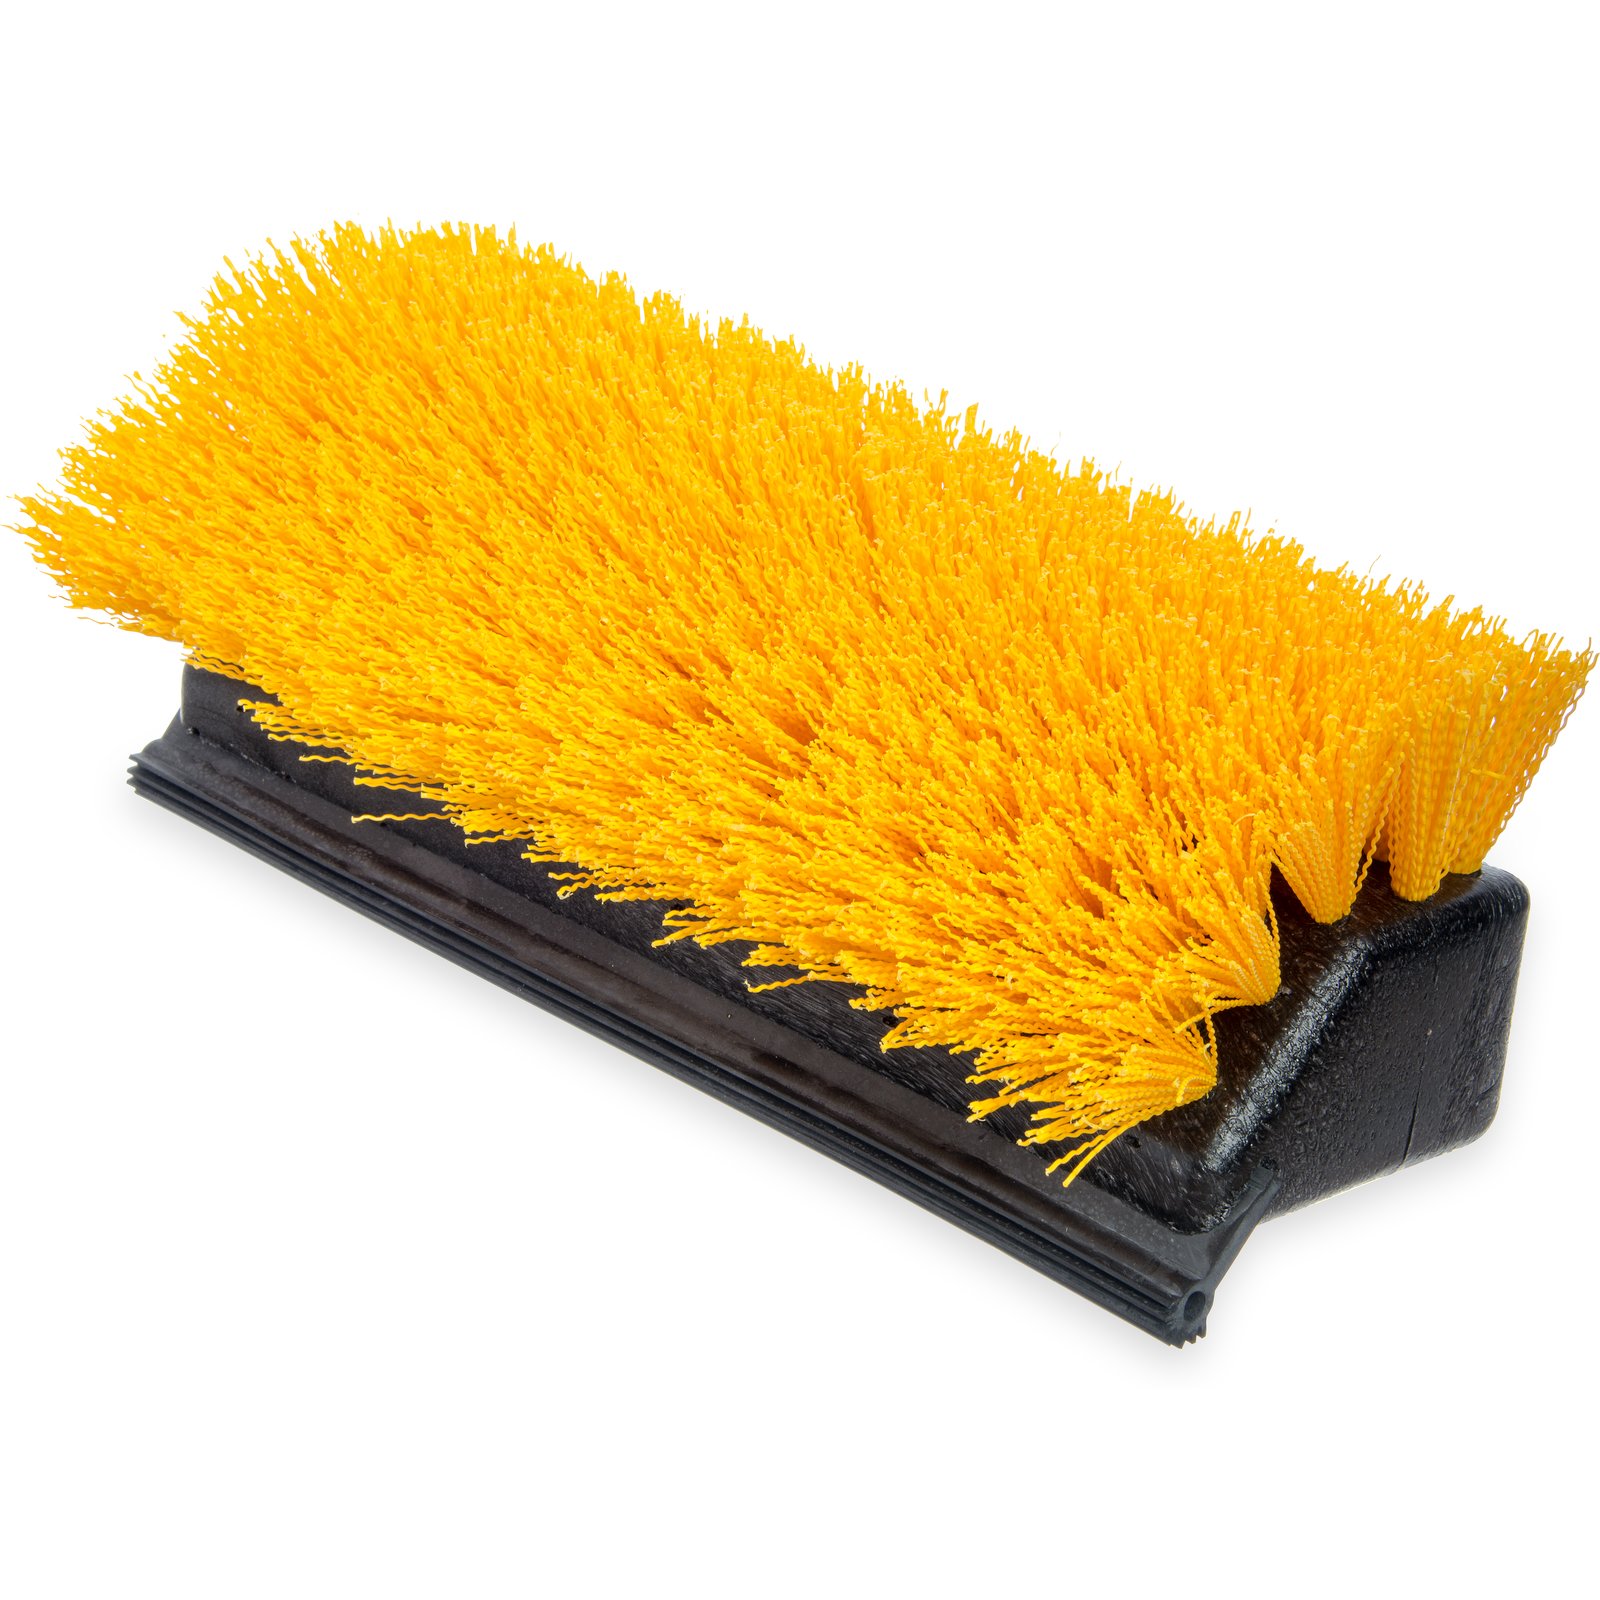 MATCC Floor Scrub Brush with 10'' Squeegee Edge for Home Cleaning